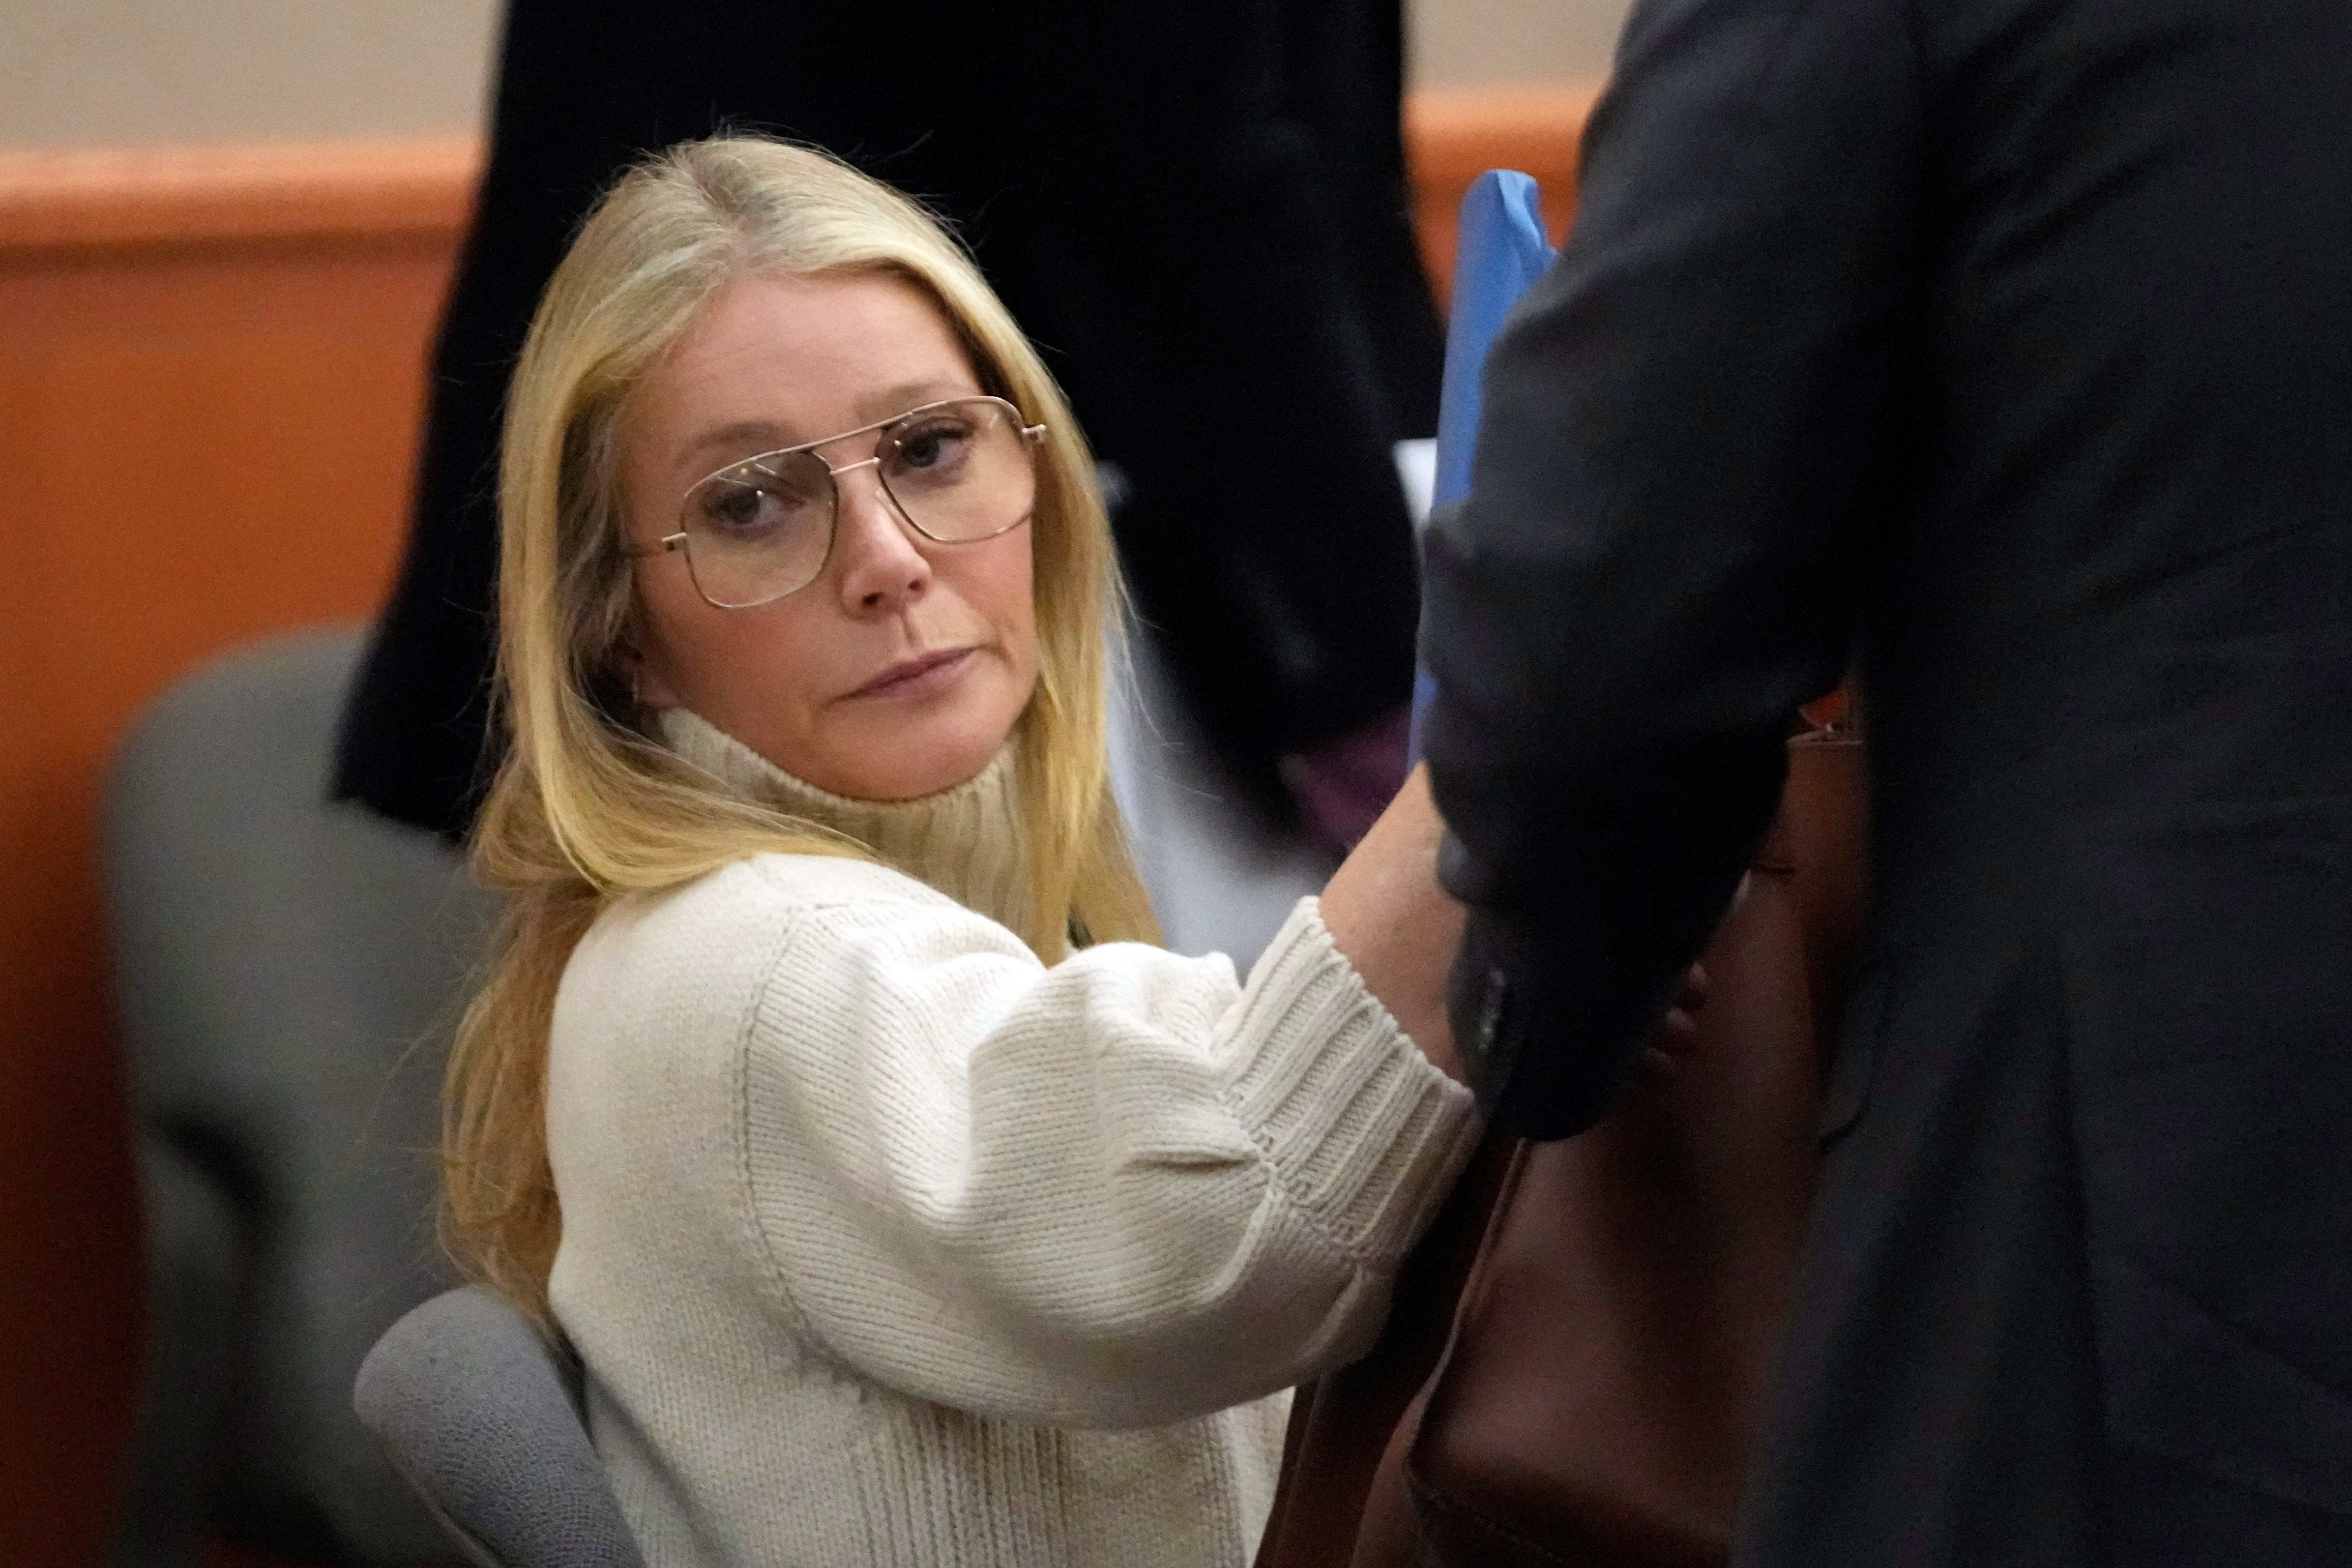 Paltrow wore a cream-coloured turtleneck and 70s aviator glasses on her first day in court